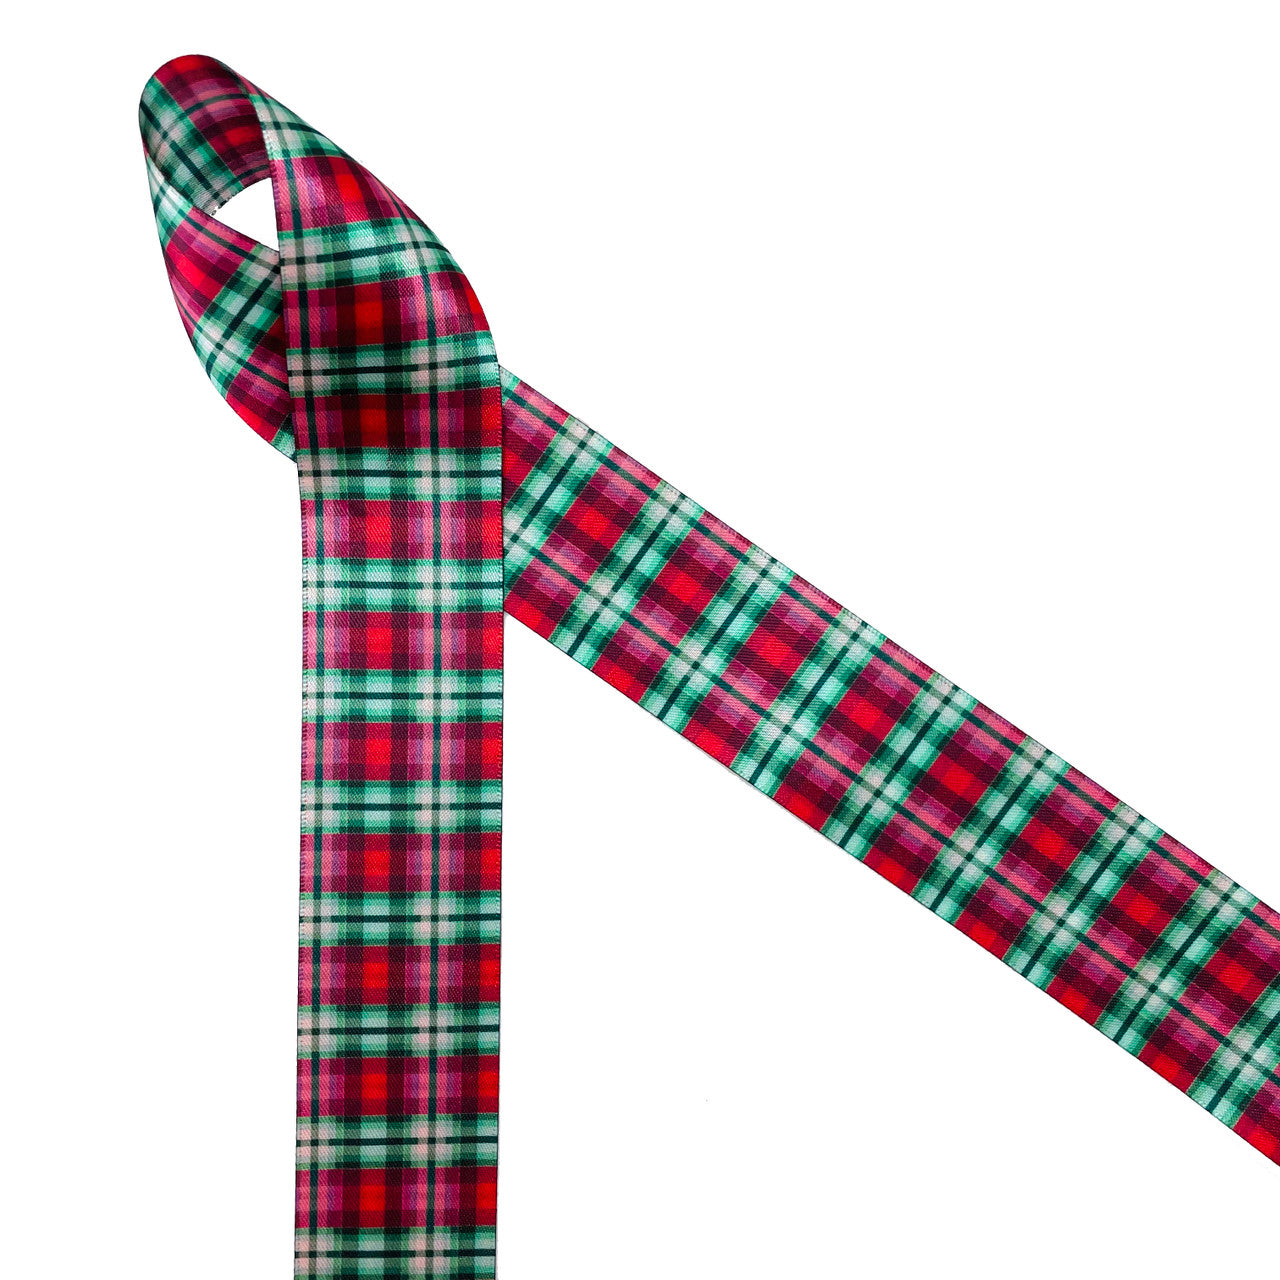 Christmas plaid in red and green is a Holiday classic design. Christmas plaid in red and green printed on 1.5" white double face satin ribbon is  the perfect addition to any Holiday decor. Use this beautiful ribbon for gift wrap, gift baskets, holiday decor, tree trimming, floral design, wreaths, craft ribbon, sewing and quilting projects. All our ribbon is designed and printed in the USA